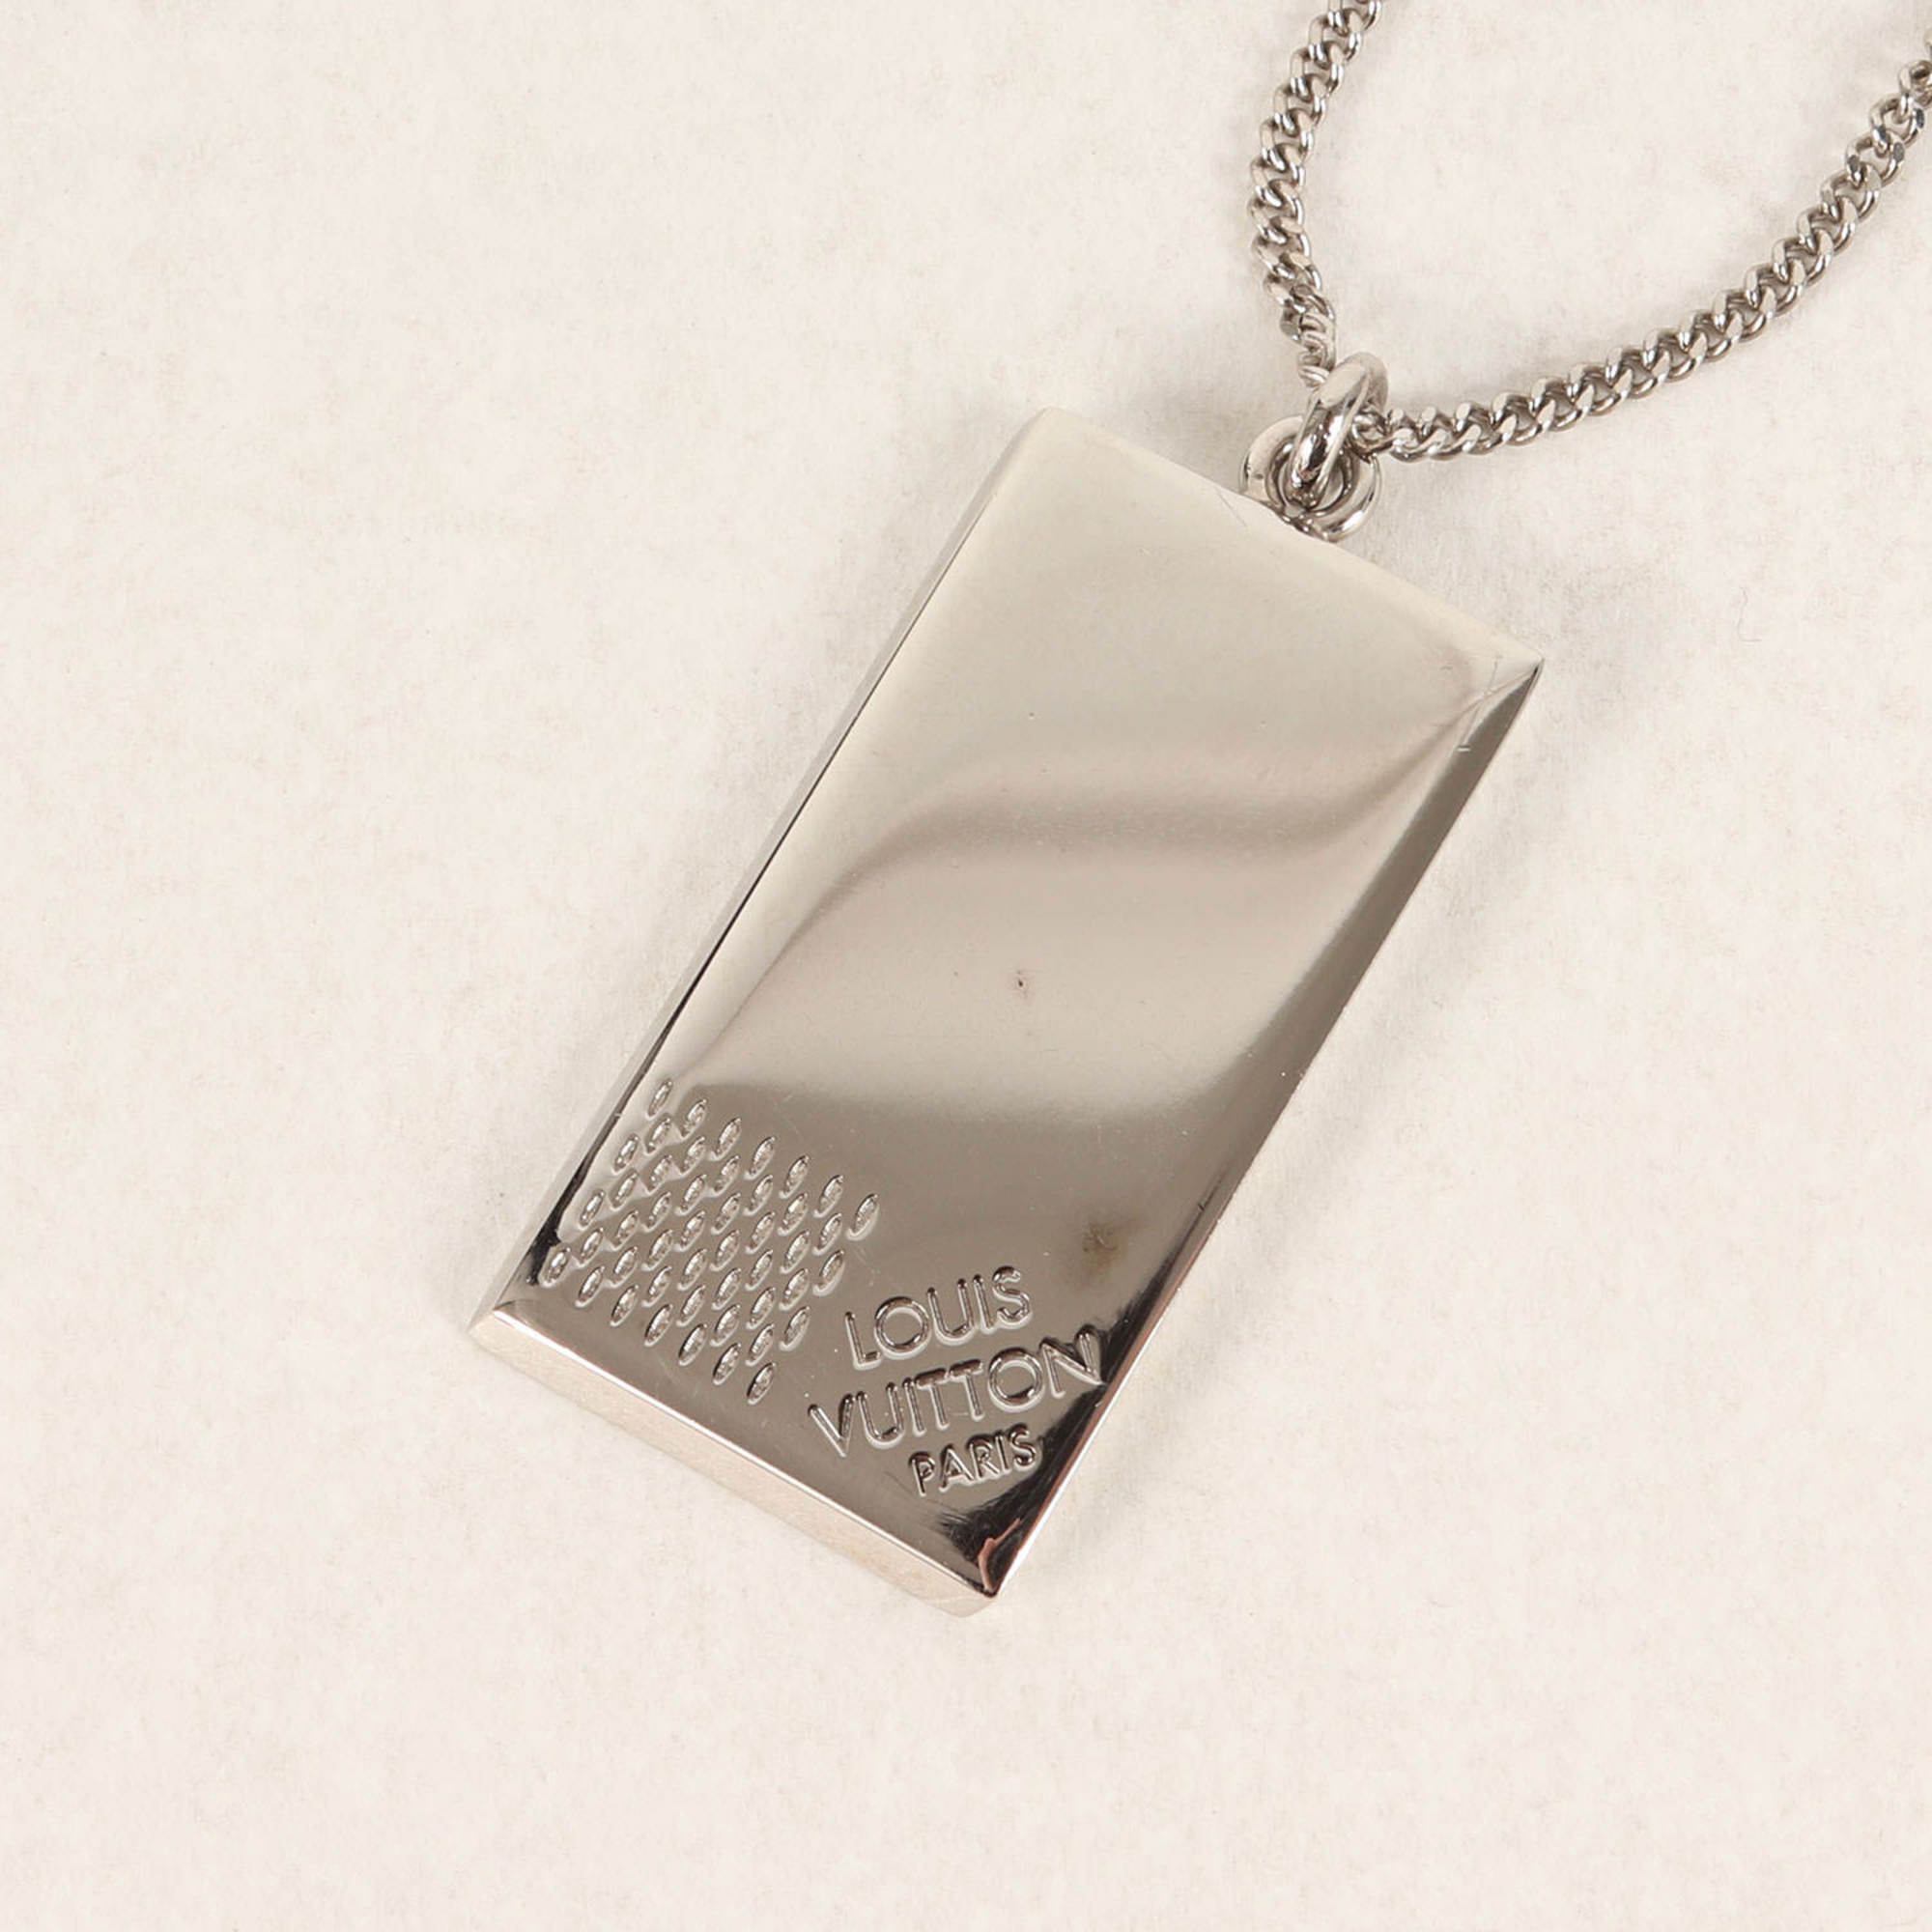 LOUIS VUITTON Collier Plaque Damier Necklace M61972 Pendant Plate Accessory Silver Made in Italy